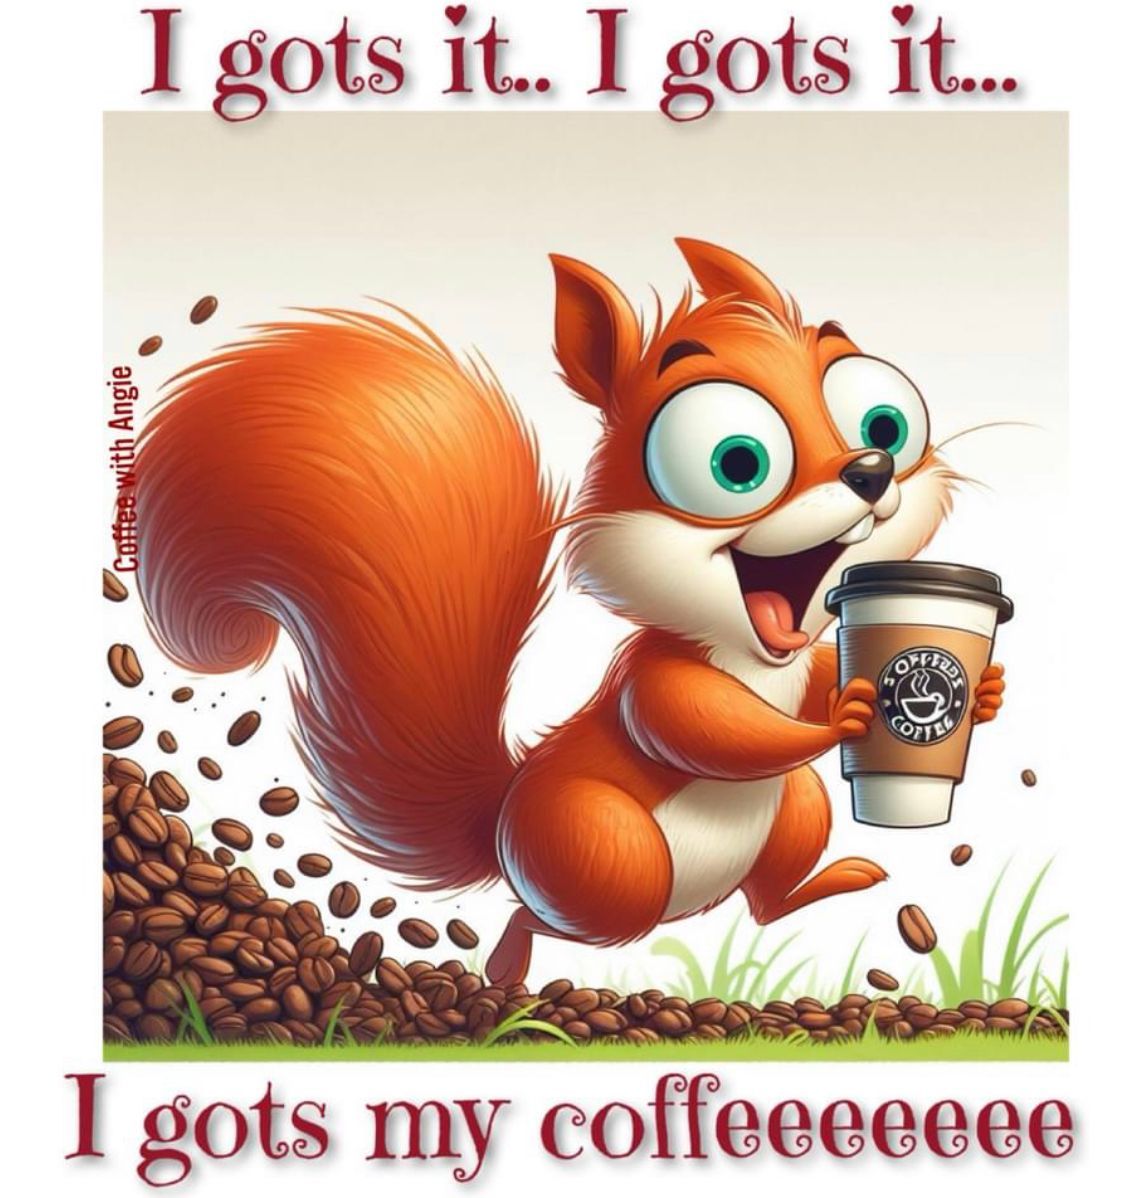 Good Morning #5amwritersclub

I hope your coffee brings you
the joy that it brings me & this squirrel
For me it’s the doorway between
restful sleep & focused writing
Both I enjoy equally

#amwriting #writer #WritingCommunity #WritersCafe #AuthorLife #readingcommunity #booktwitter